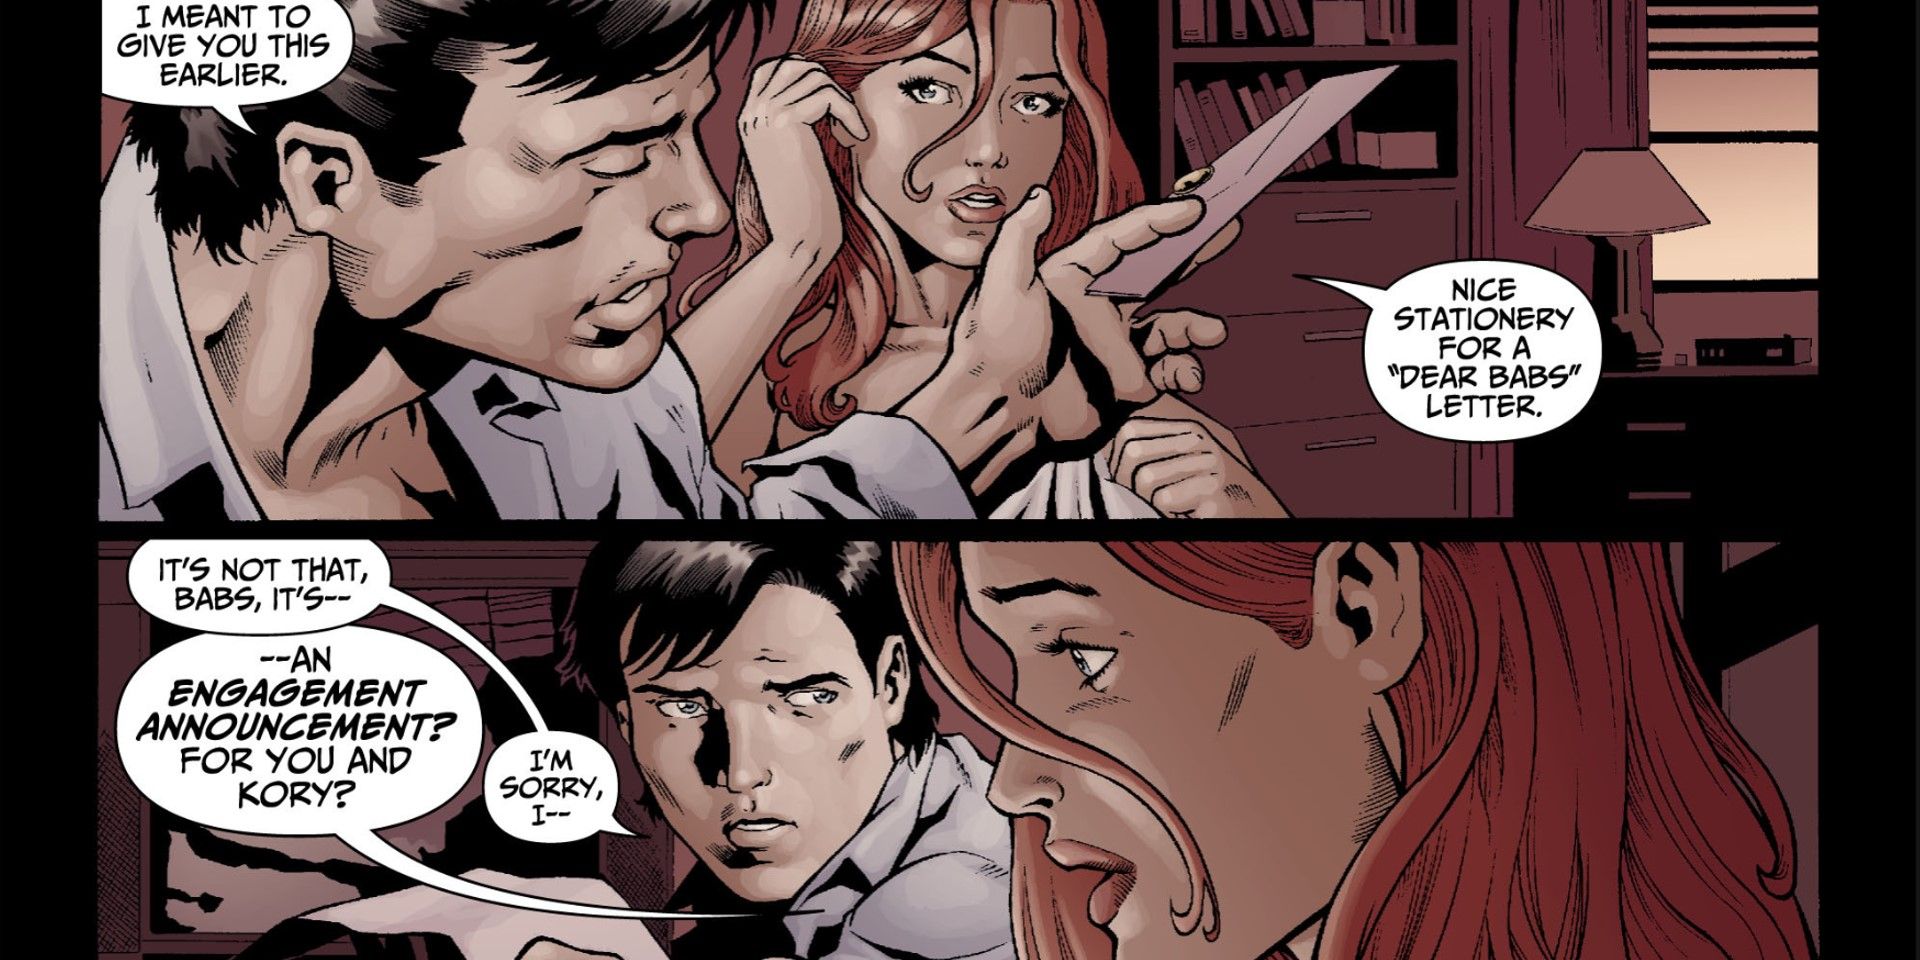 Dick Grayson Gives Barbara Gordon His & Kory's Engagement Announcement in DC Comics